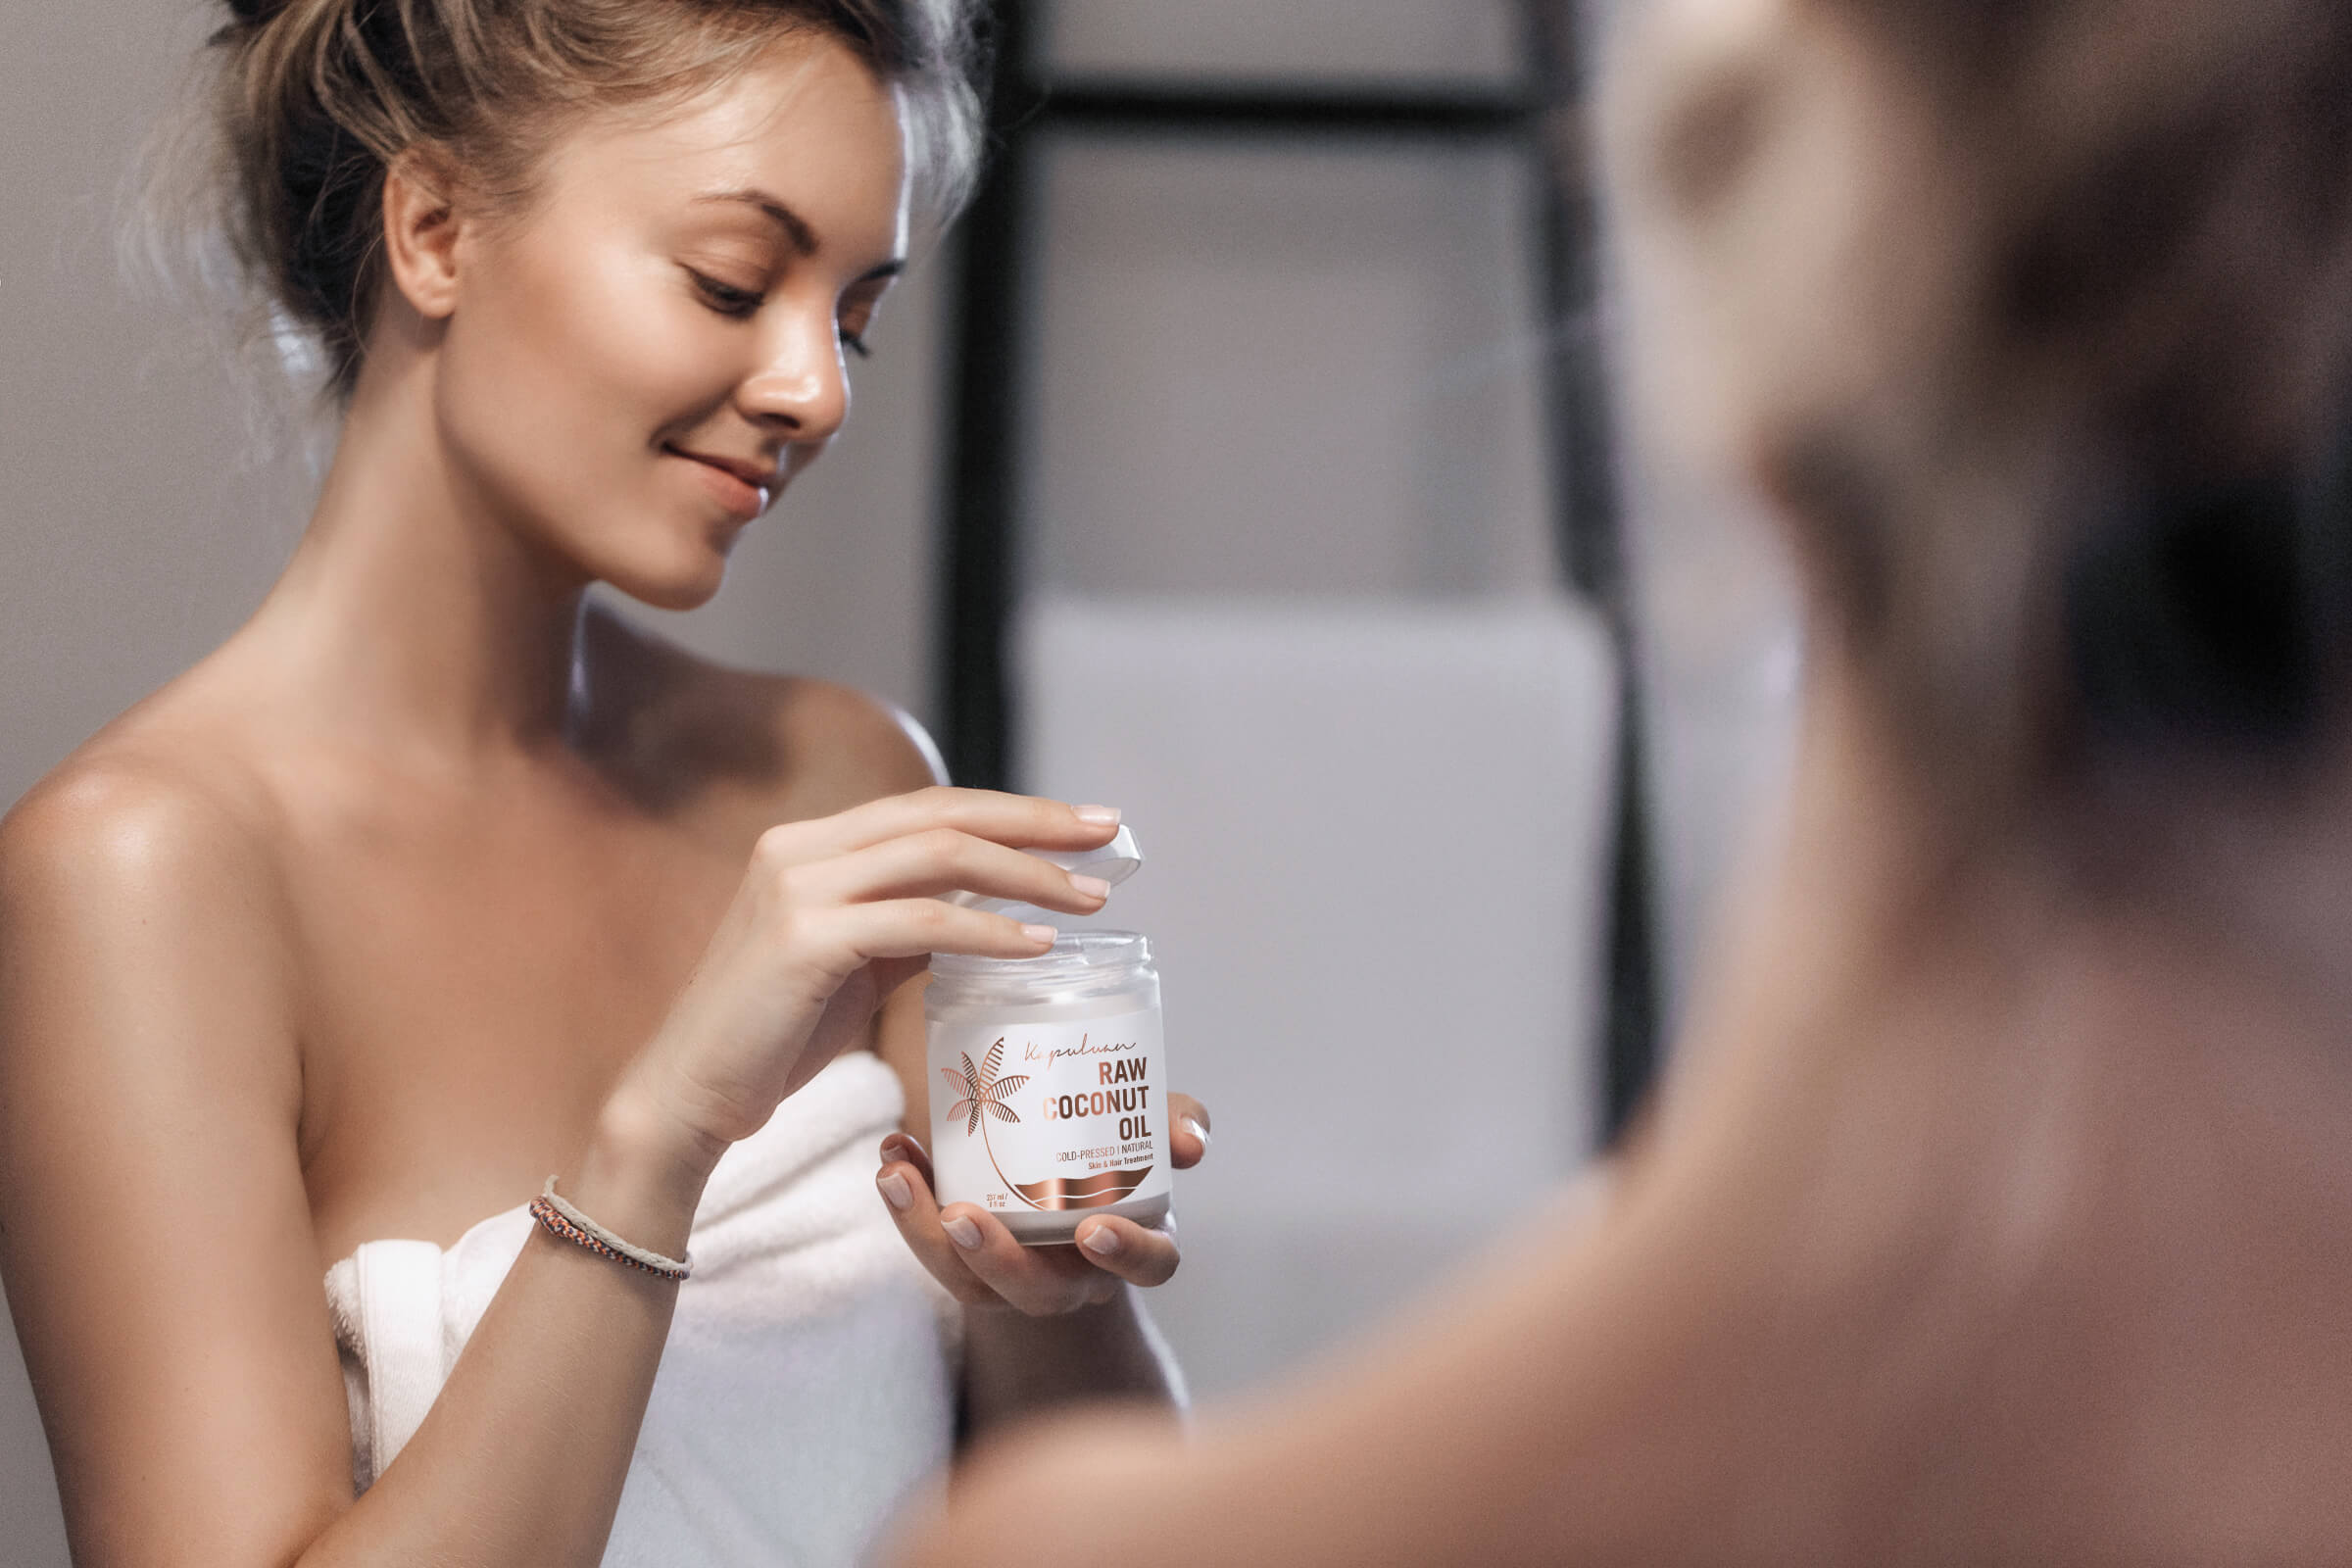 A woman wearing a towel looks at a jar labeled 'Cold-Pressed Raw Coconut Oil' in her hand, smiling as she stands before a mirror in a well-lit bathroom.